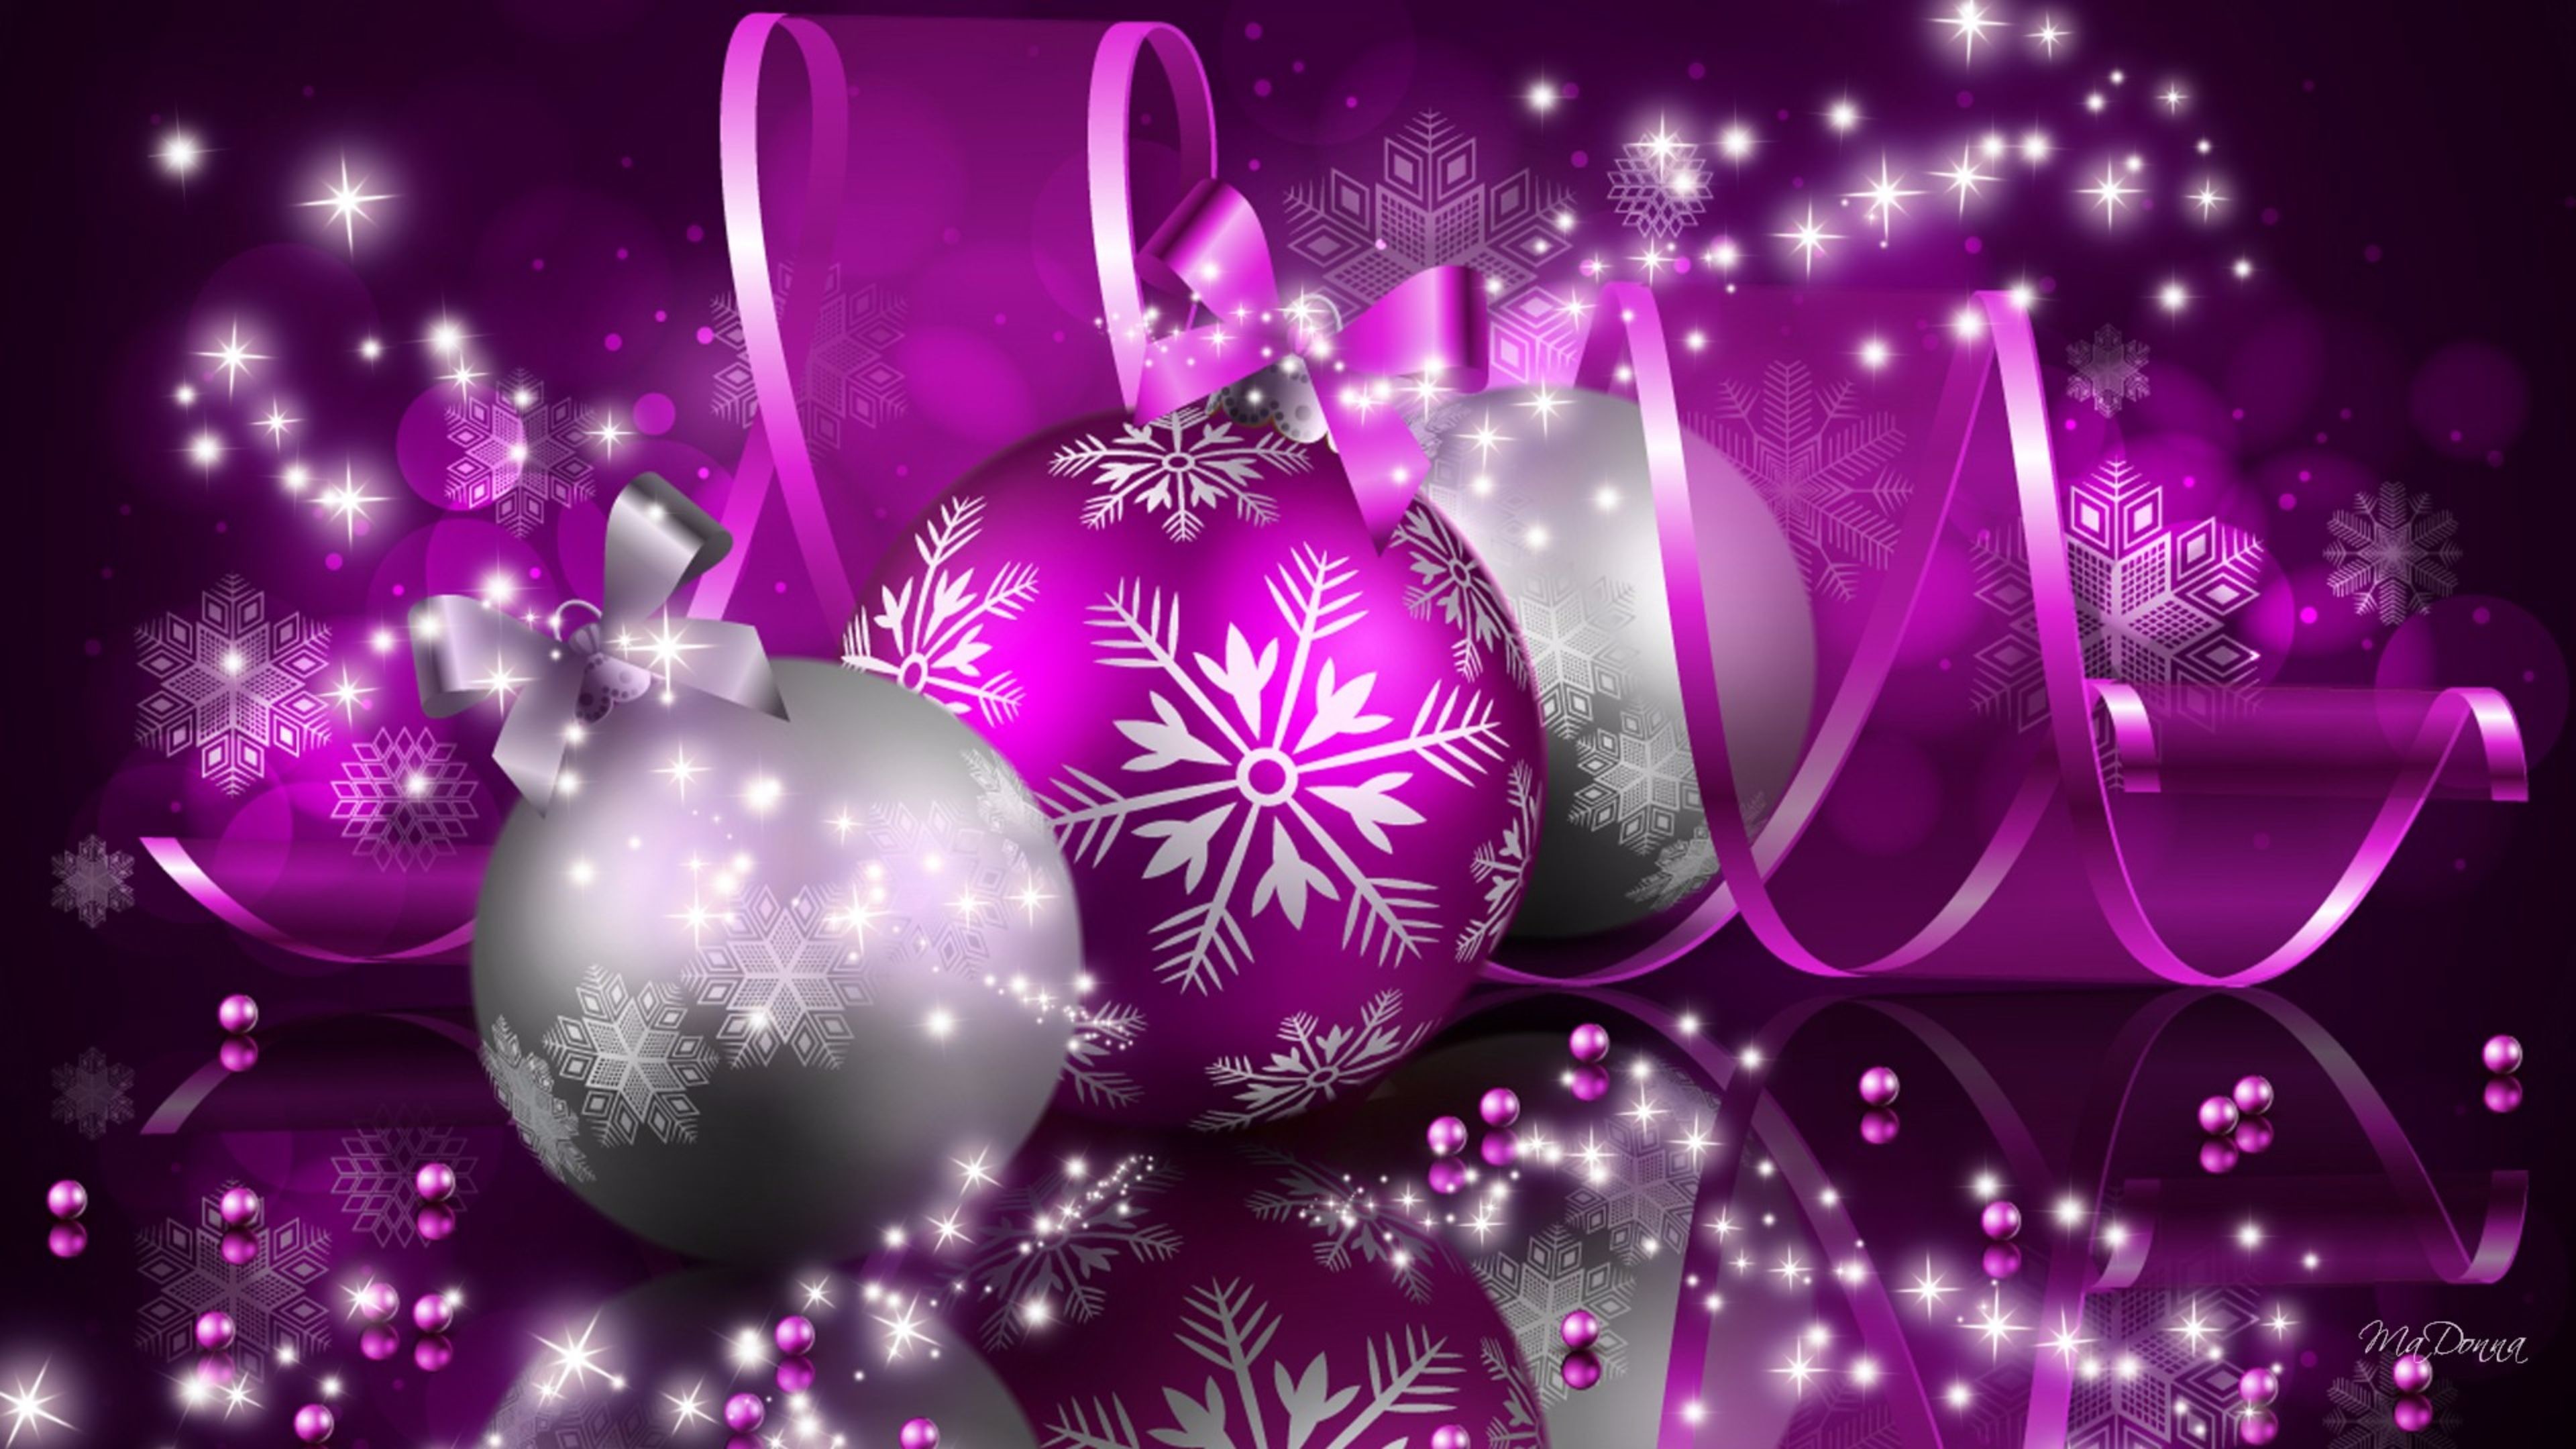 Merry Christmas Graphics | Background, christmas, merry, pictures .